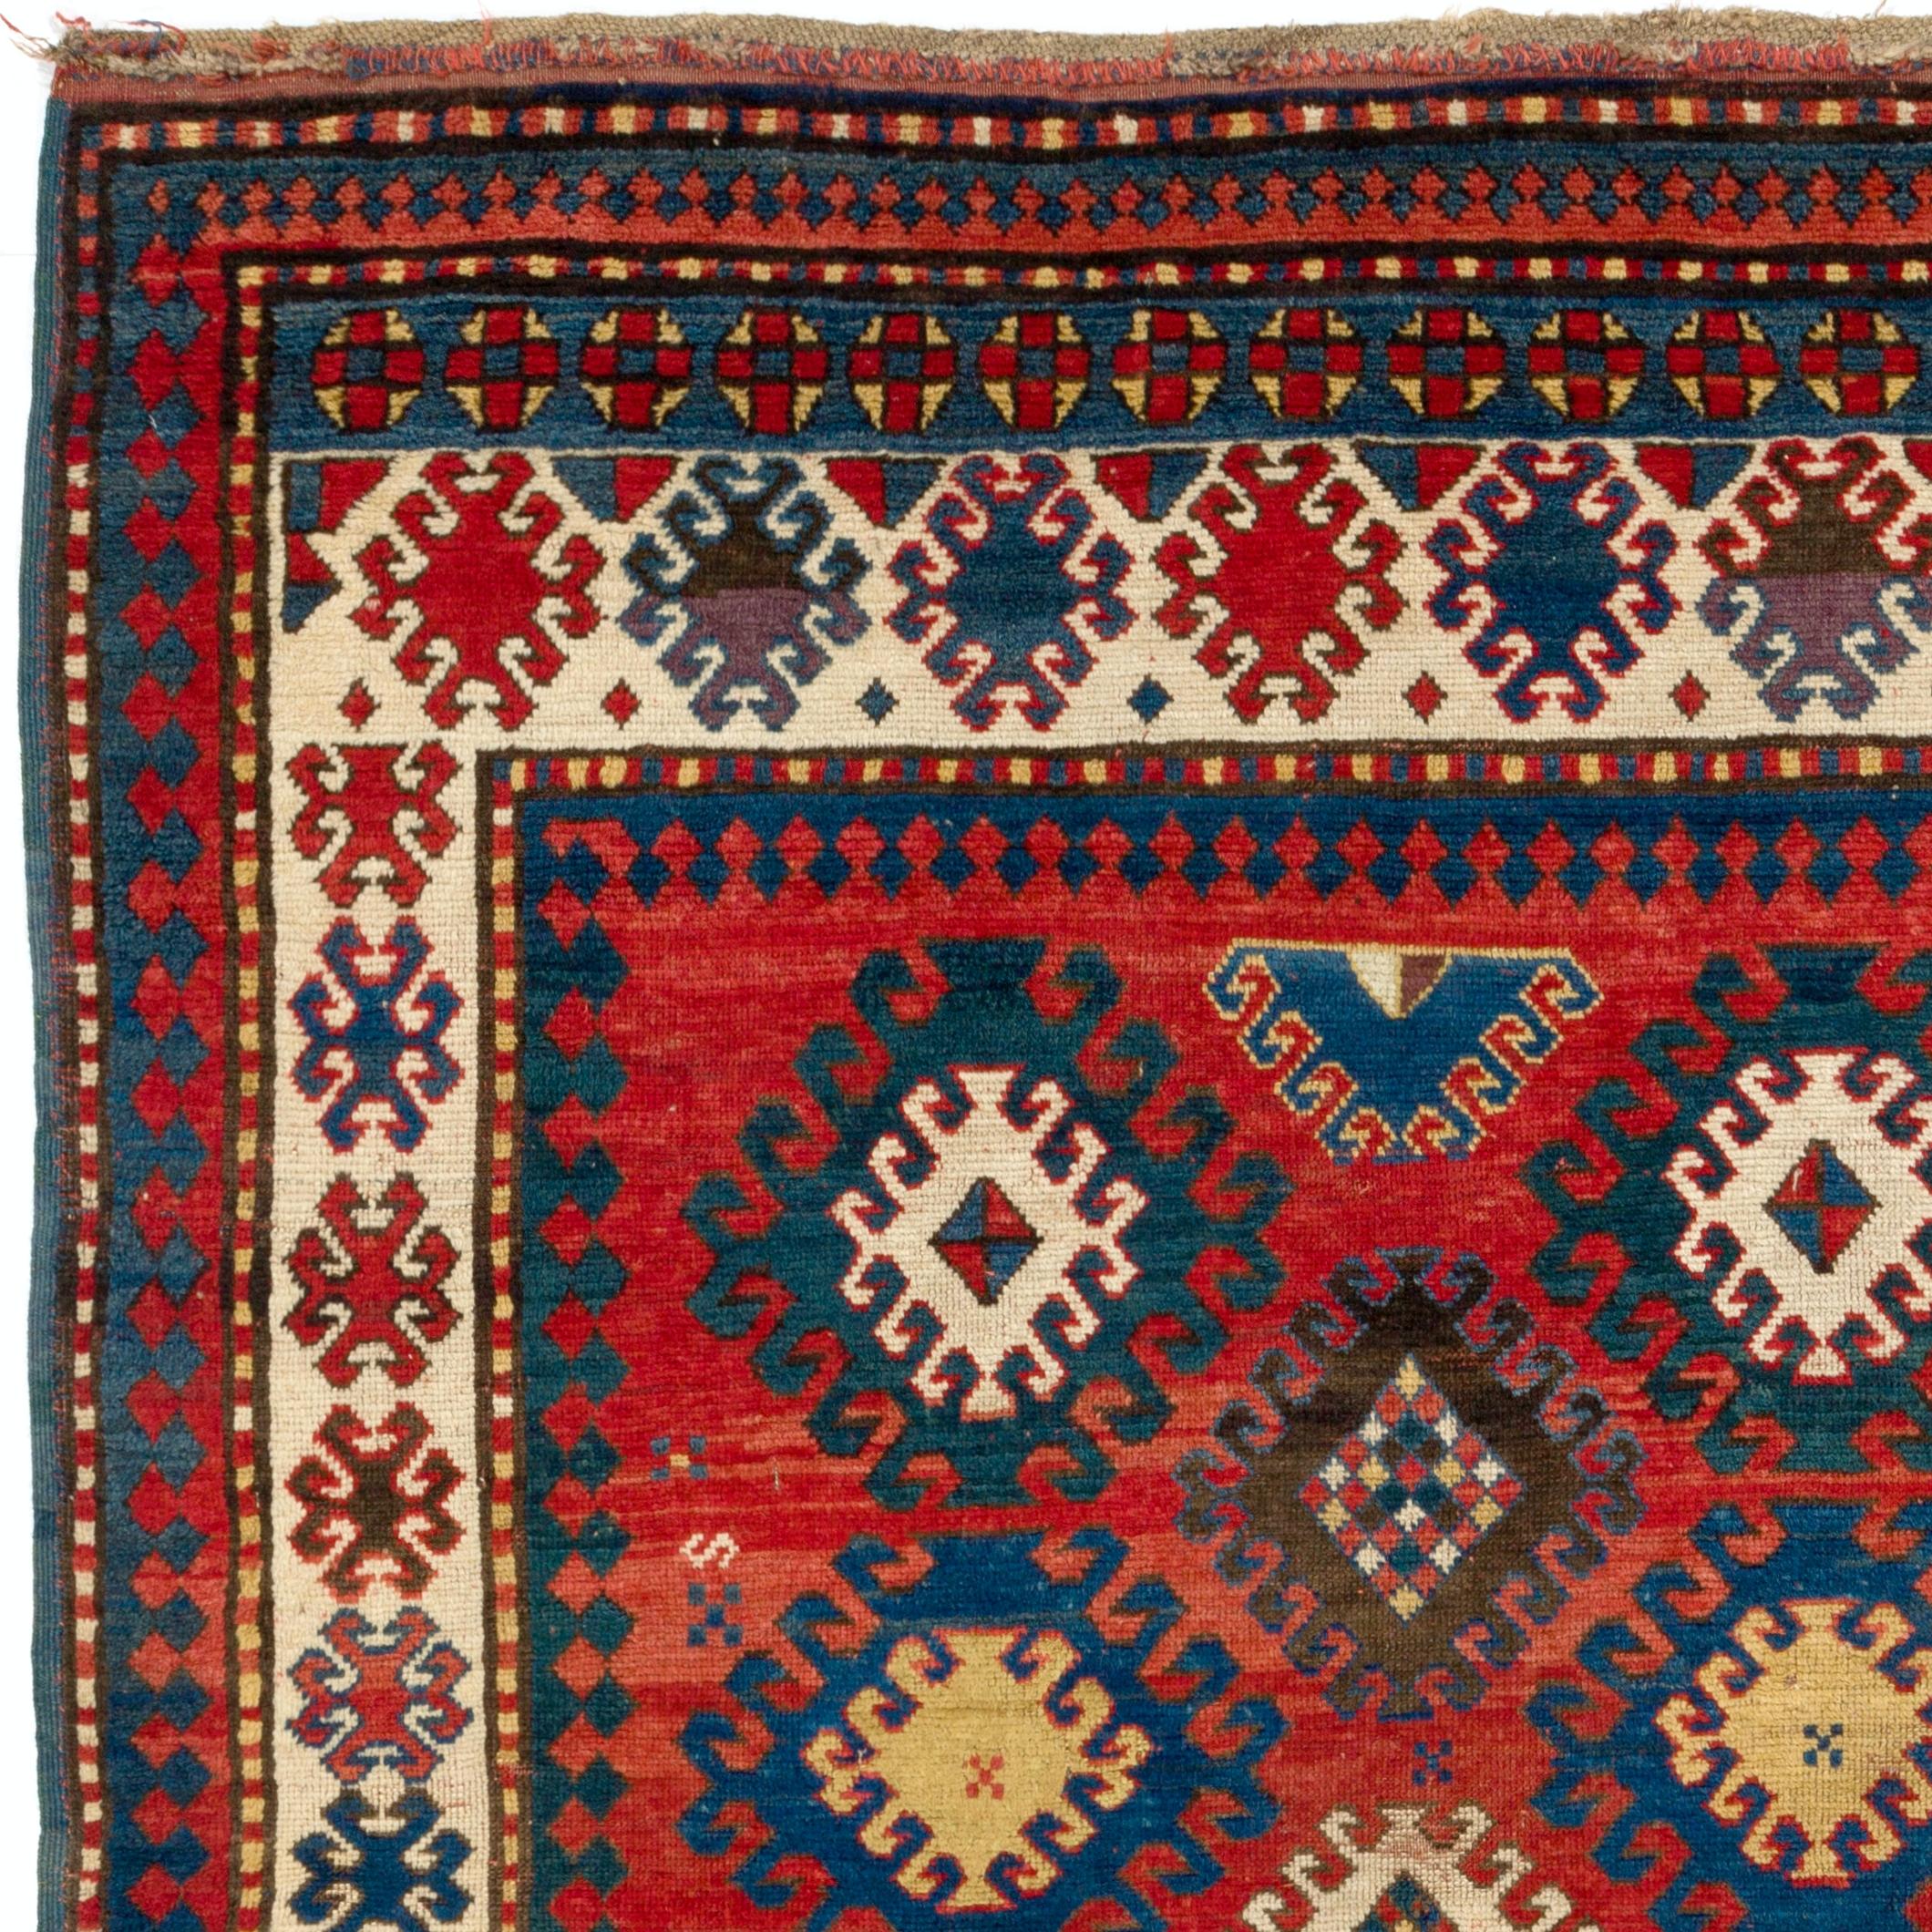 A radiant, alluring antique Caucasian Kazak rug from the 1860s in a gorgeous color palette with a bold, dynamic design. The floating multiple hooked medallions at the center, each containing wheel of life and eye motifs in glowing marine blue, deep